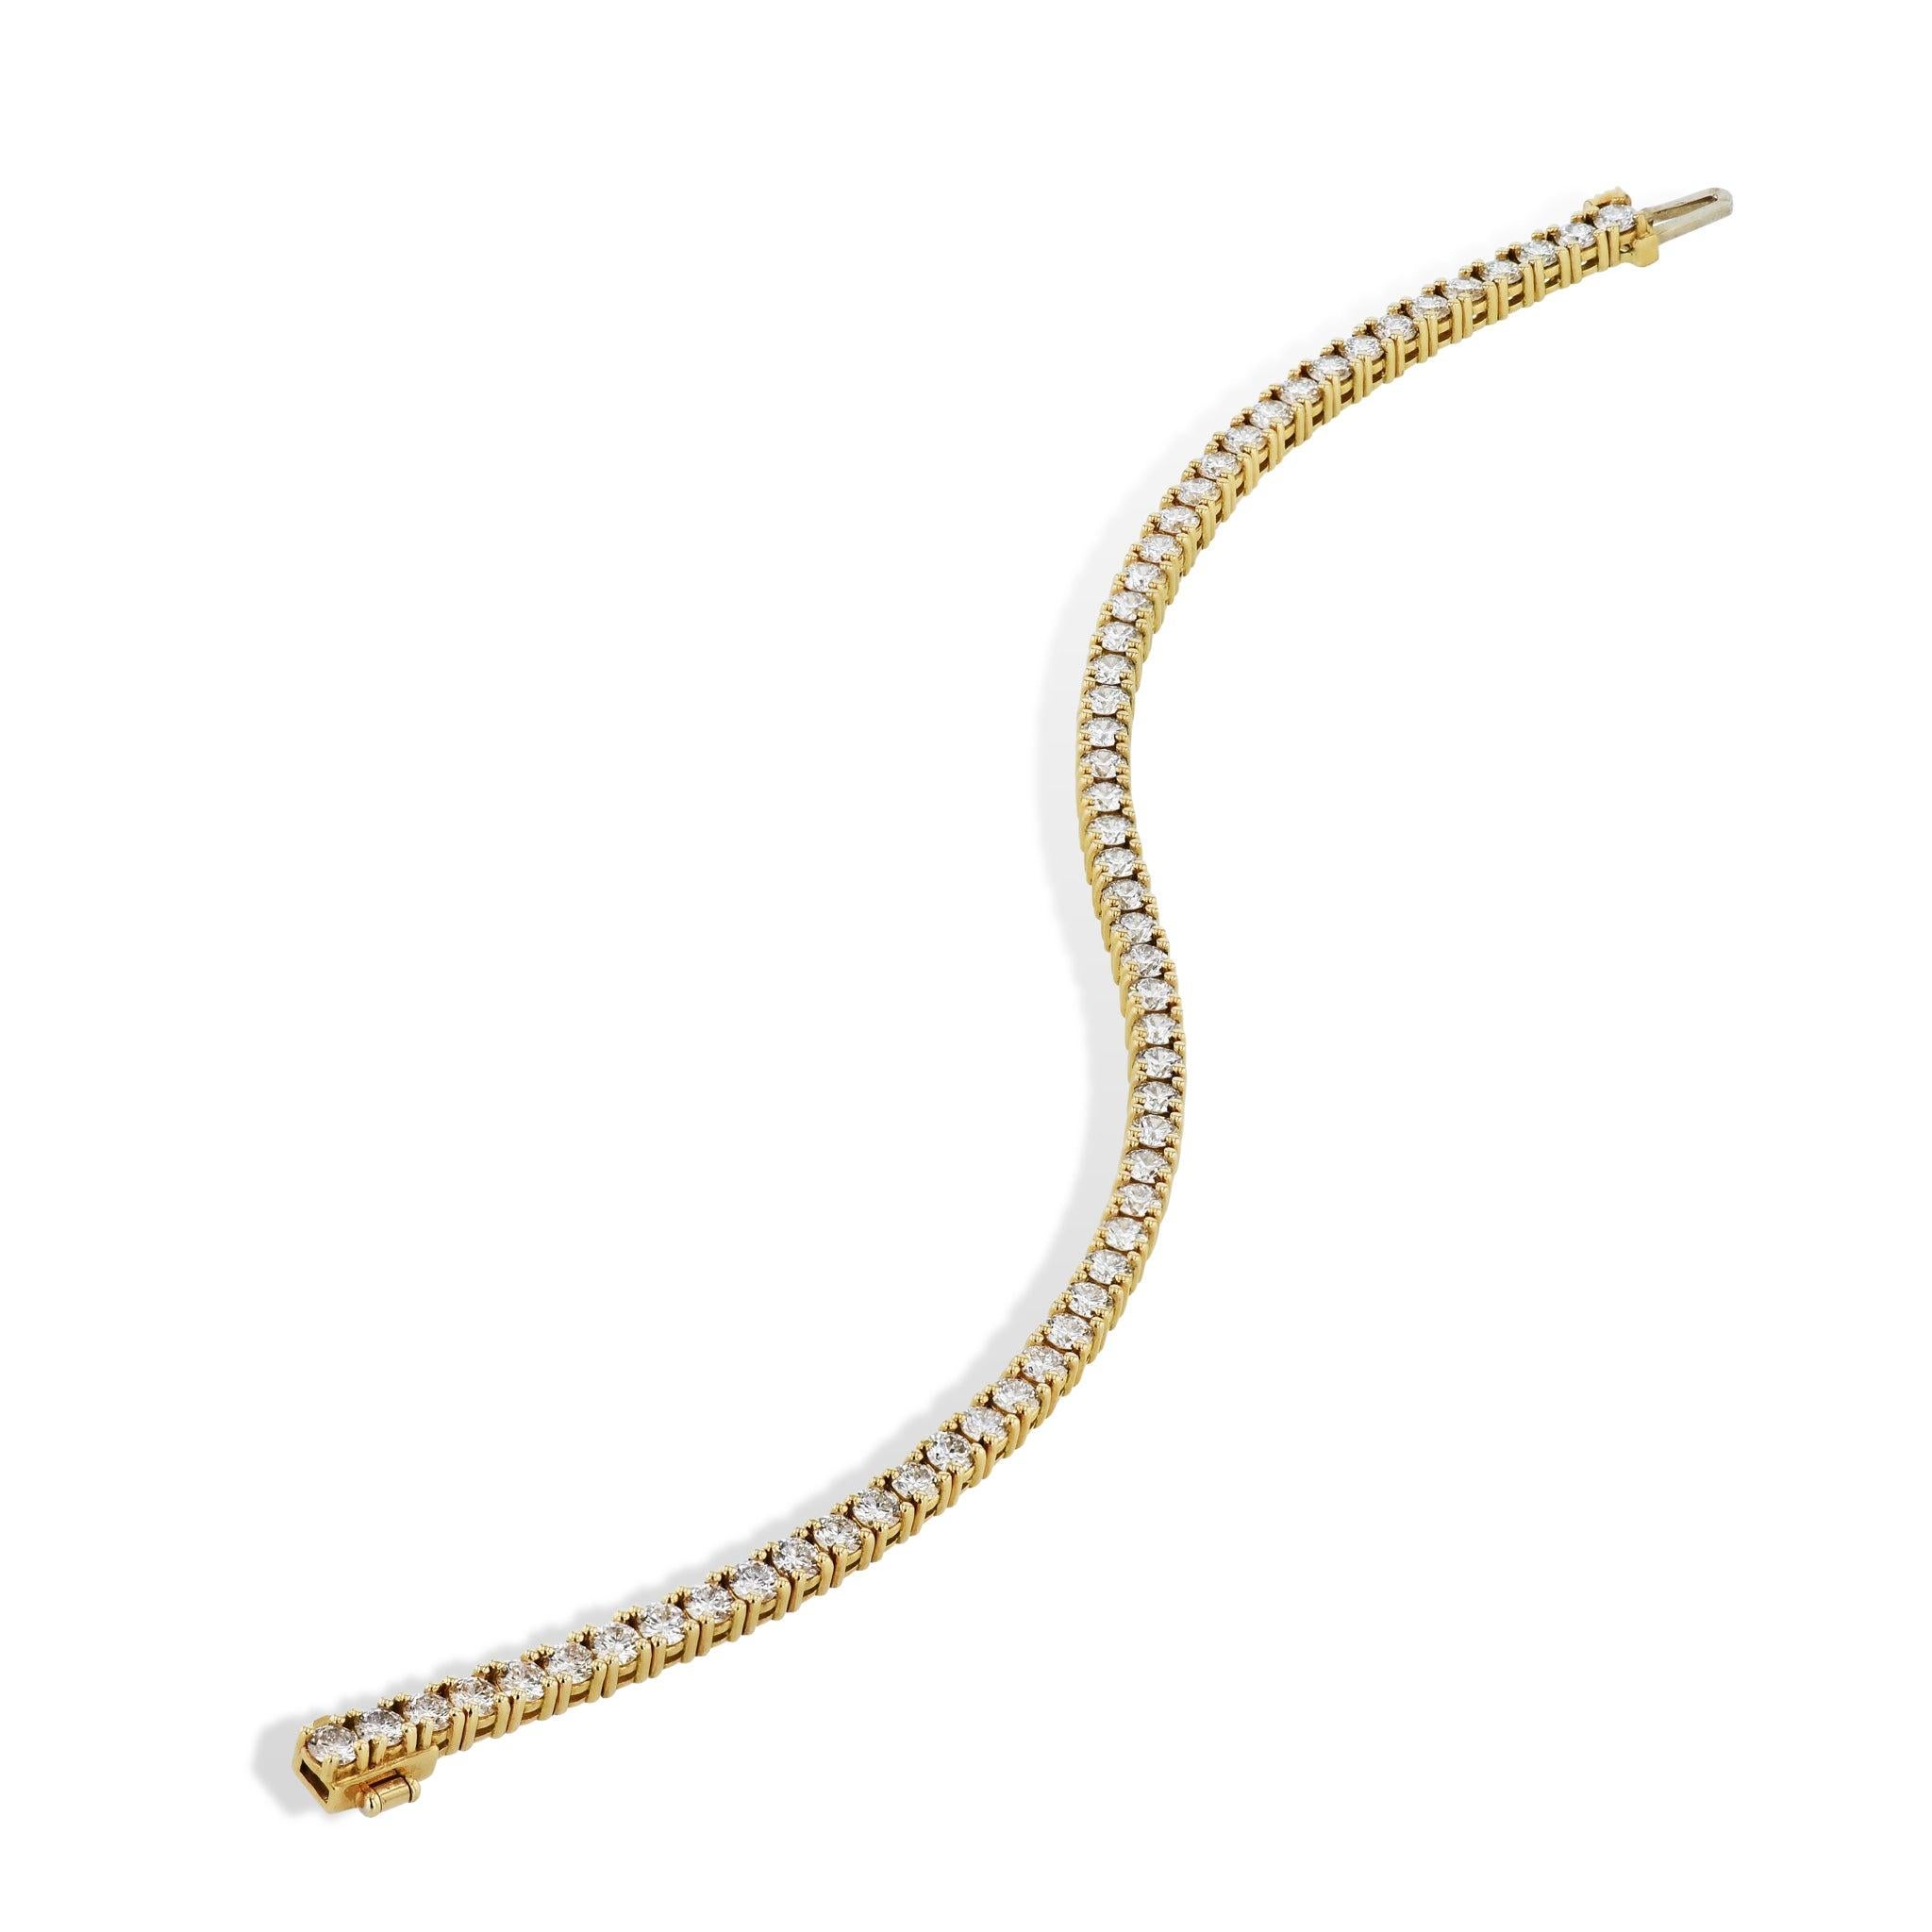 This magnificent 18kt Yellow Gold Tennis Bracelet dazzles with 58 dazzling Round Brilliant Cut Diamonds! Handcrafted with a 4-prong setting and expertly crafted by H&H Jewels, it's a breathtaking vision!
Diamond Yellow Gold Tennis Bracelet
18kt